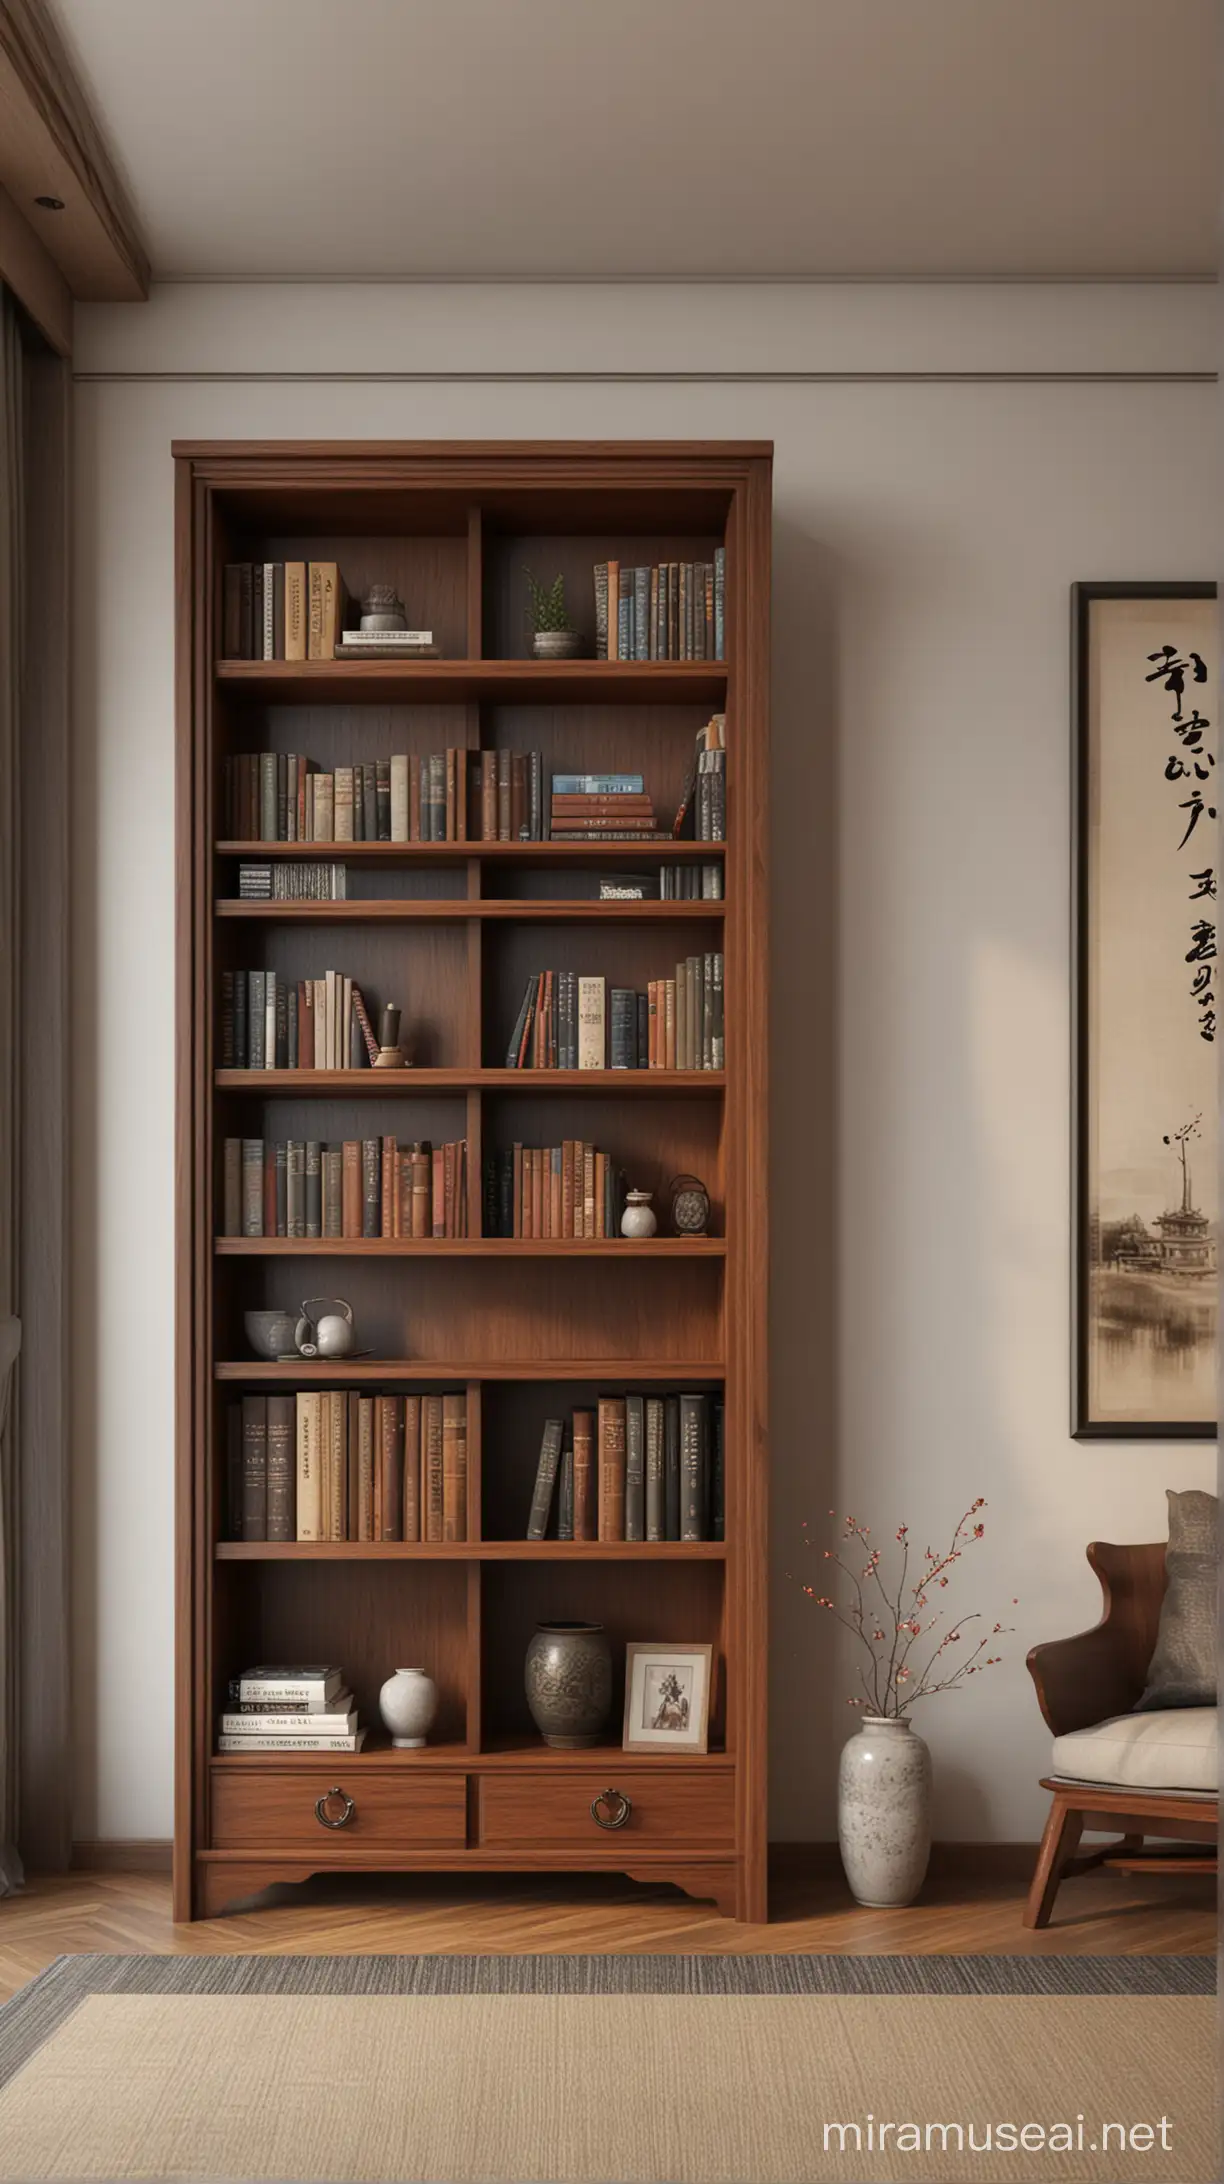 Realistic Indoor Scene with ChineseStyle Bookcase